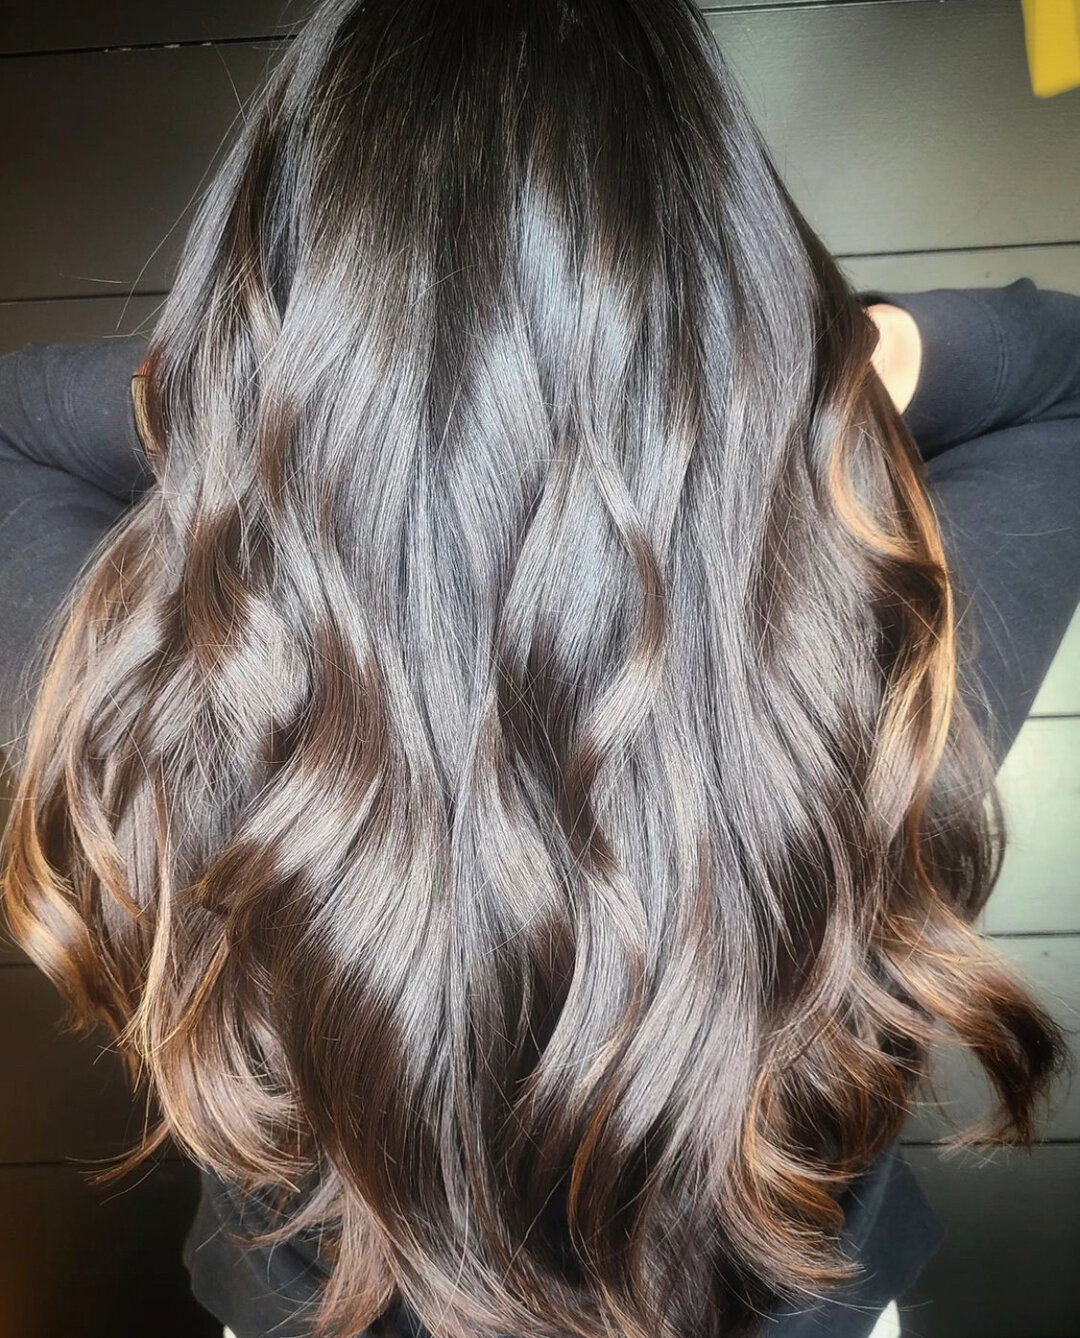 Rehydrate your hair this time of year!​​​​​​​​
​​​​​​​​
Color by @mallory.at.theshopsalon ​​​​​​​​
​​​​​​​​
We offer a variety of shine treatments and deep conditioning Treatments!​​​​​​​​
​​​​​​​​
&bull; Glosses - Add shine and restore color​​​​​​​​